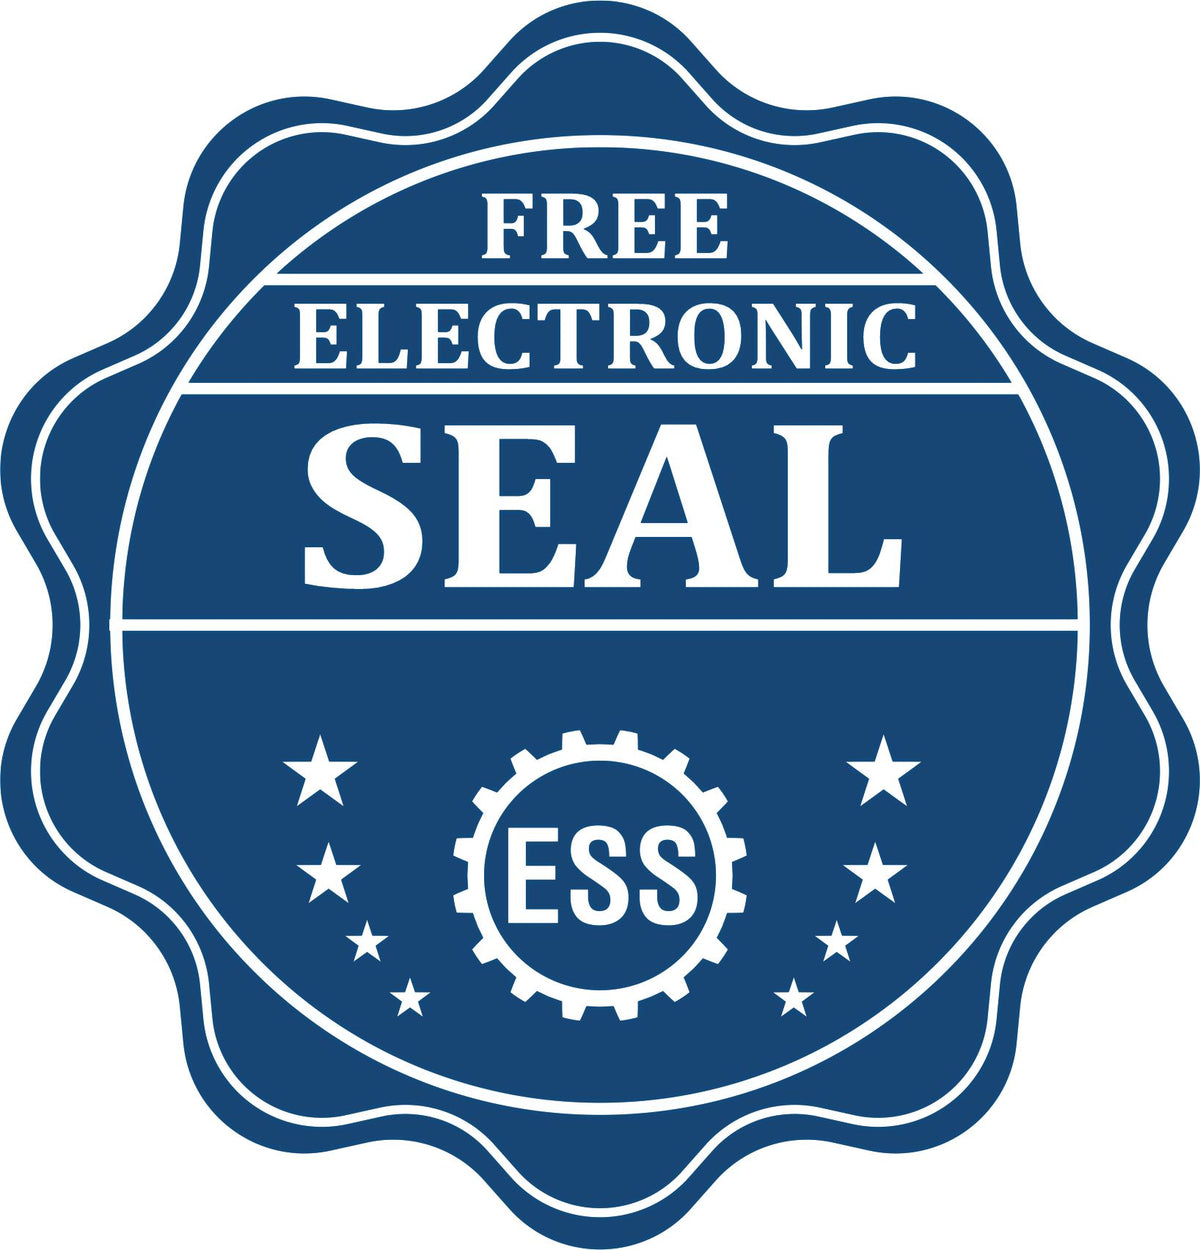 A badge showing a free electronic seal for the Premium MaxLight Pre-Inked New Mexico Geology Stamp with stars and the ESS gear on the emblem.